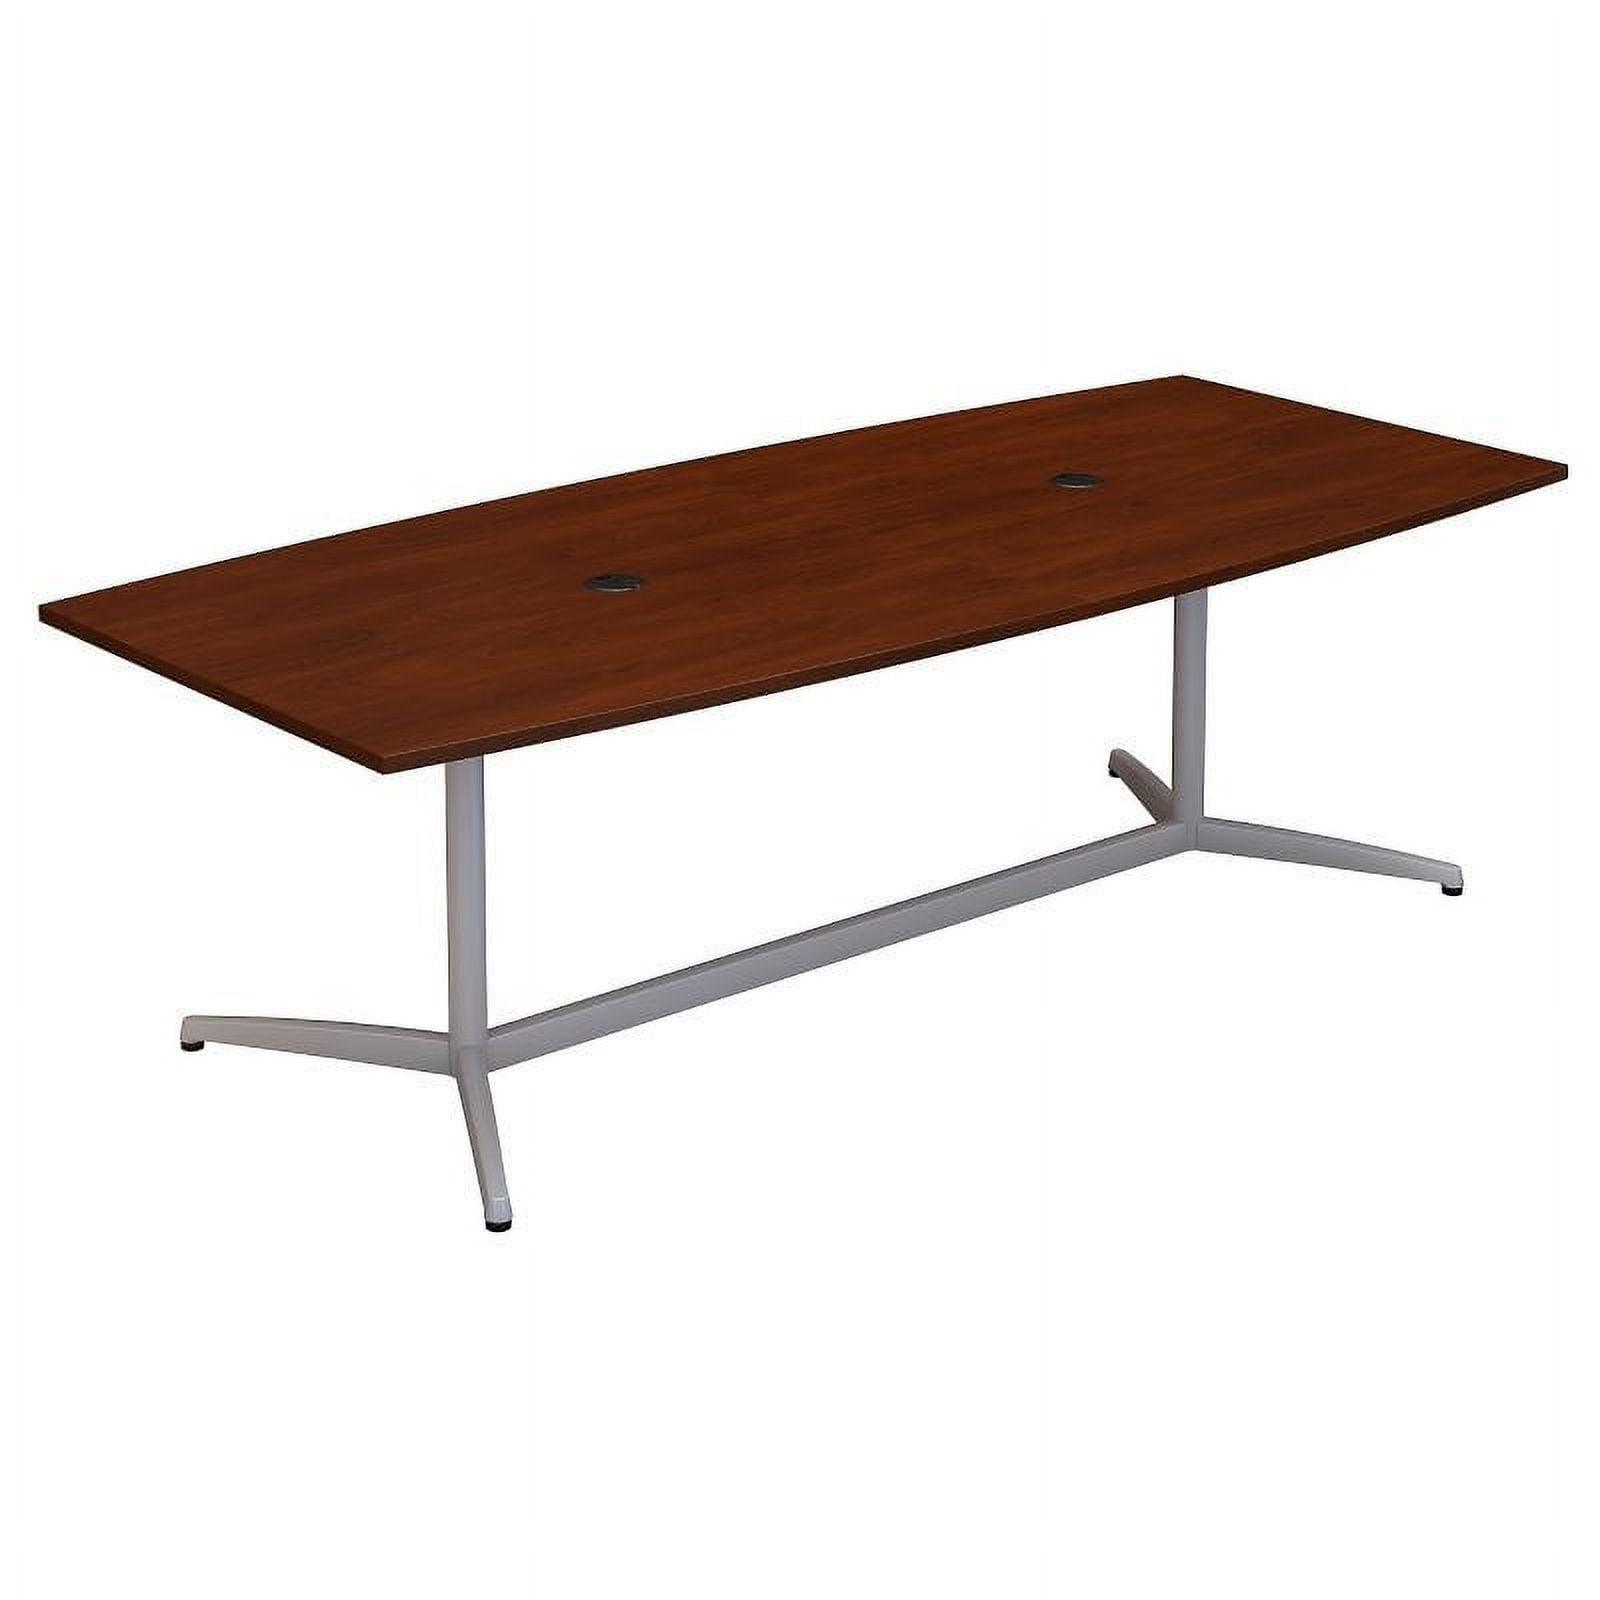 Picture of Bush Business Furniture 99TBM96HCSVK 96 x 42 in. Boat Shaped Conference Table with Metal Base - Hansen Cherry